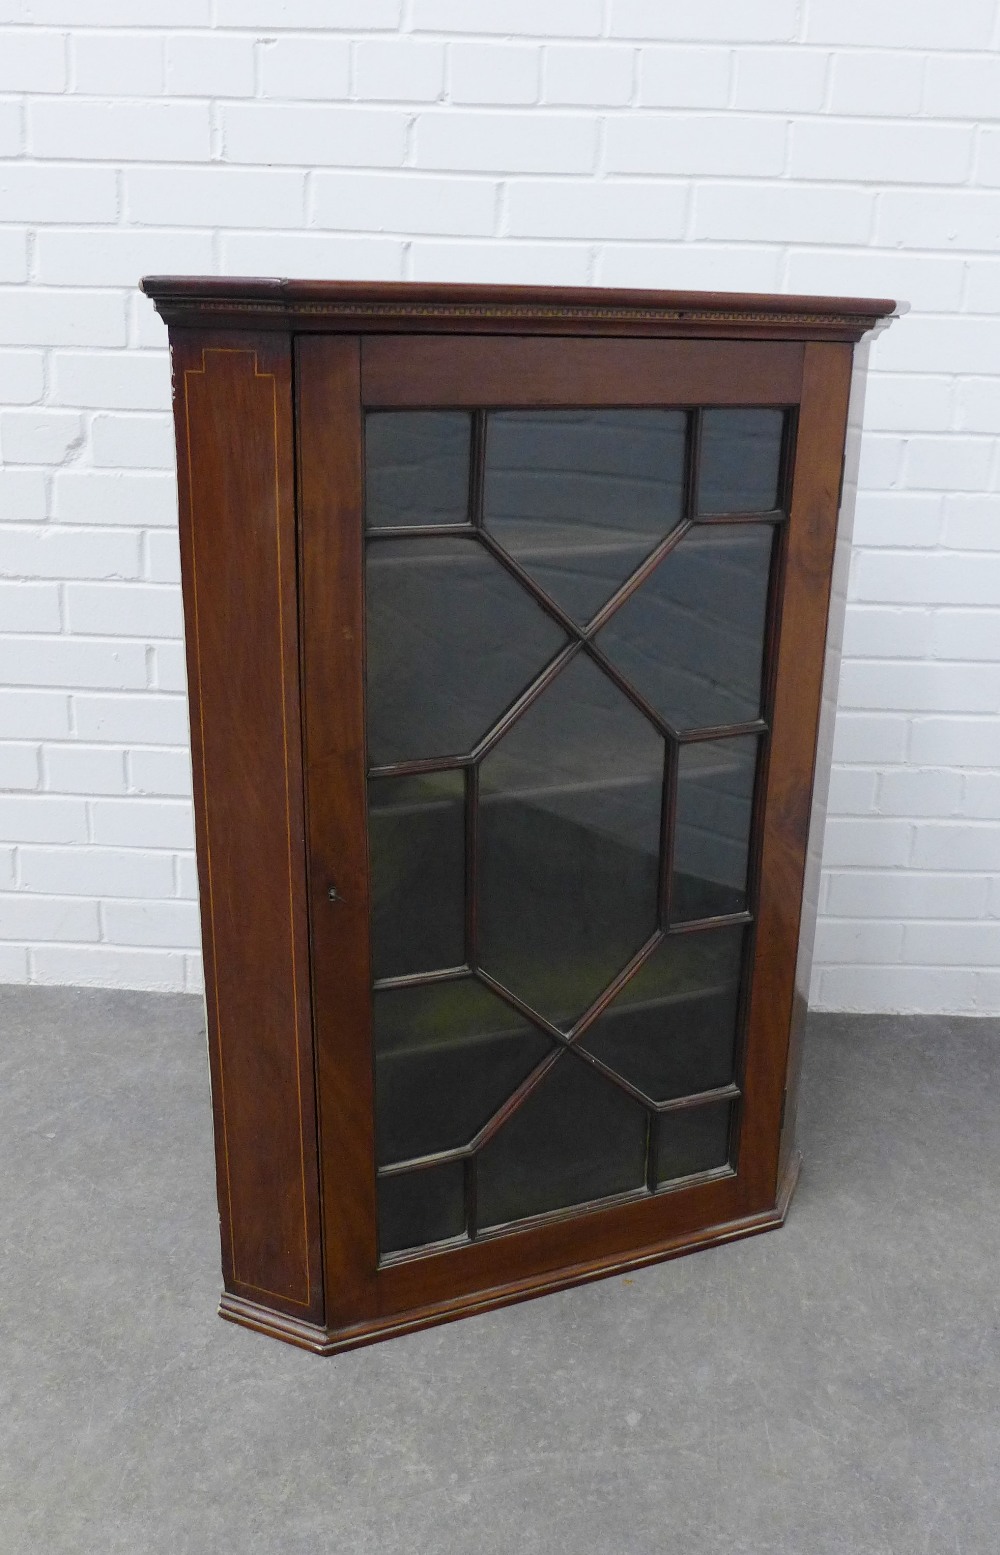 19th century mahogany and inlaid corner cupboard with astragal glazed door and shelved interior. 101